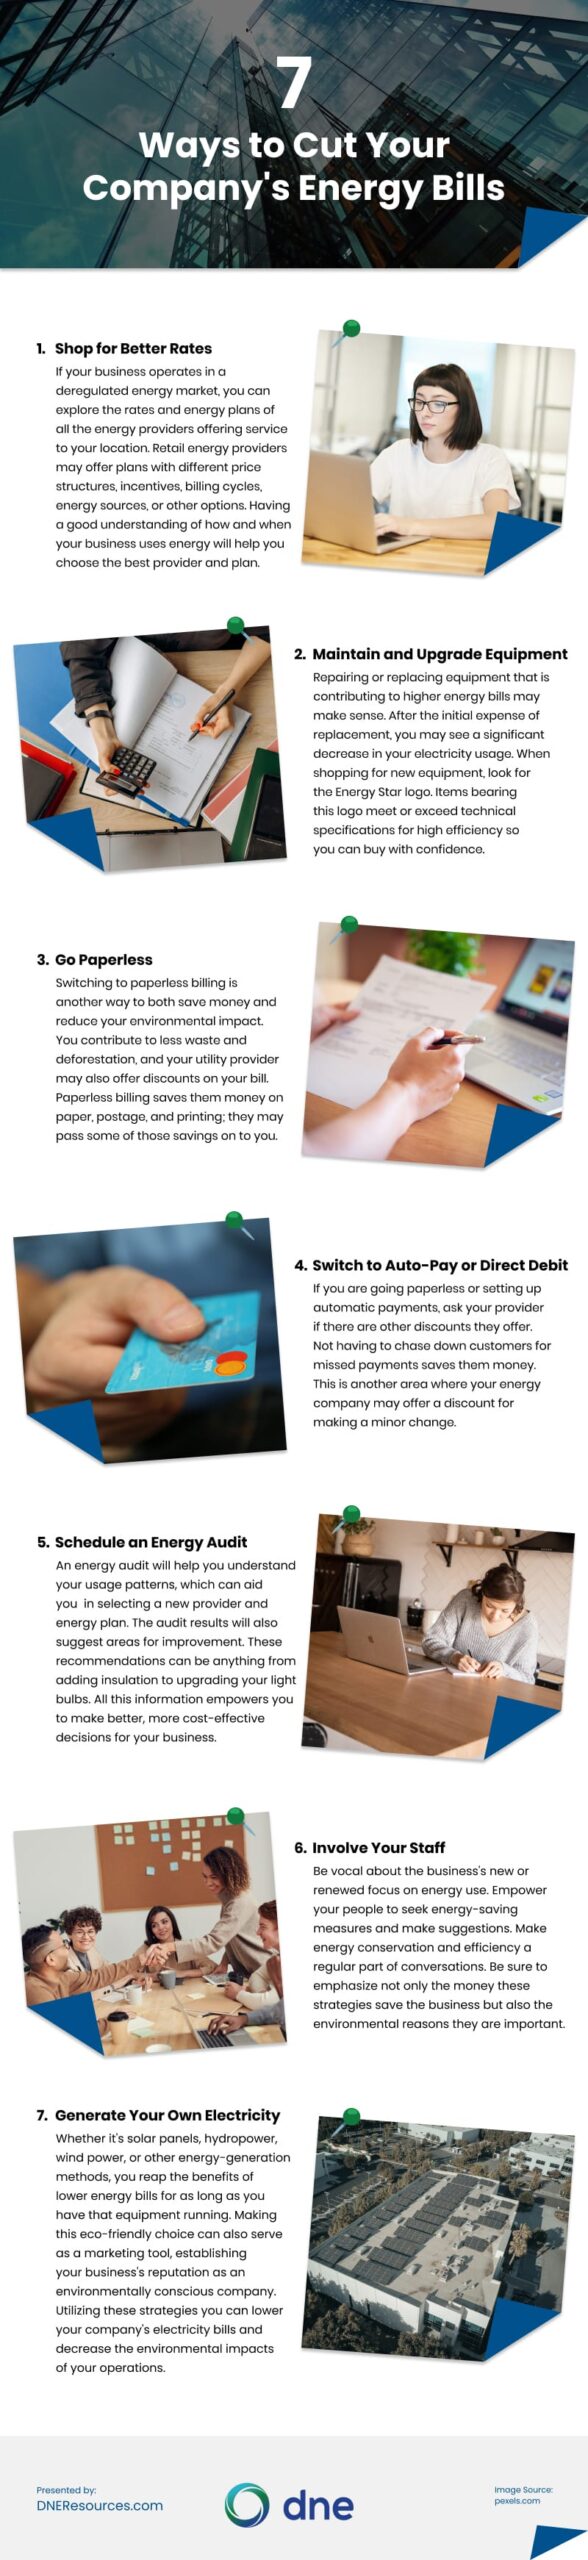 7 Ways to Cut Your Company’s Energy Bills Infographic